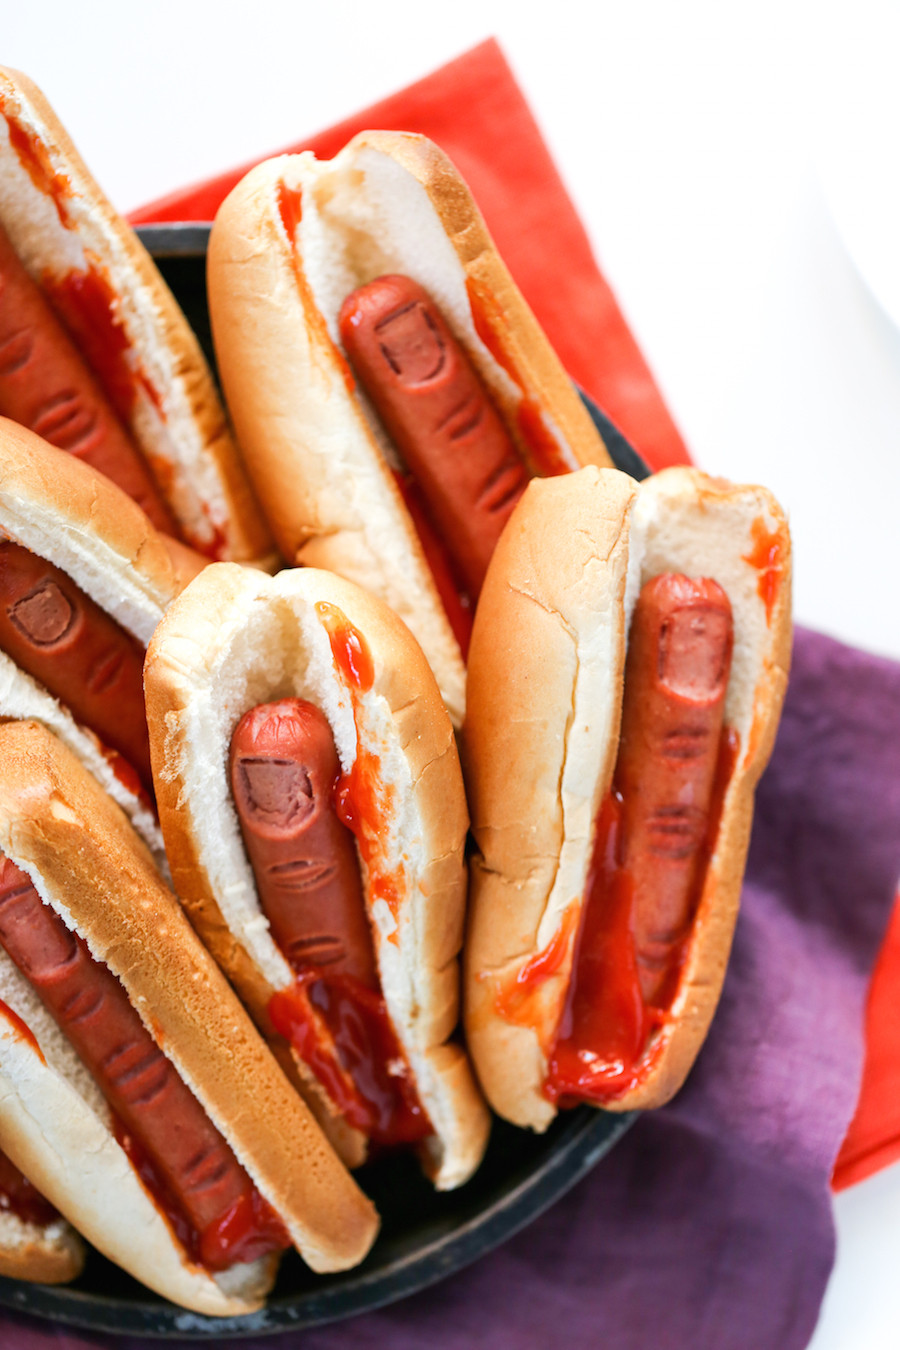 Halloween Party Food Ideas Finger Food
 Bloody Finger Hot Dogs for Halloween